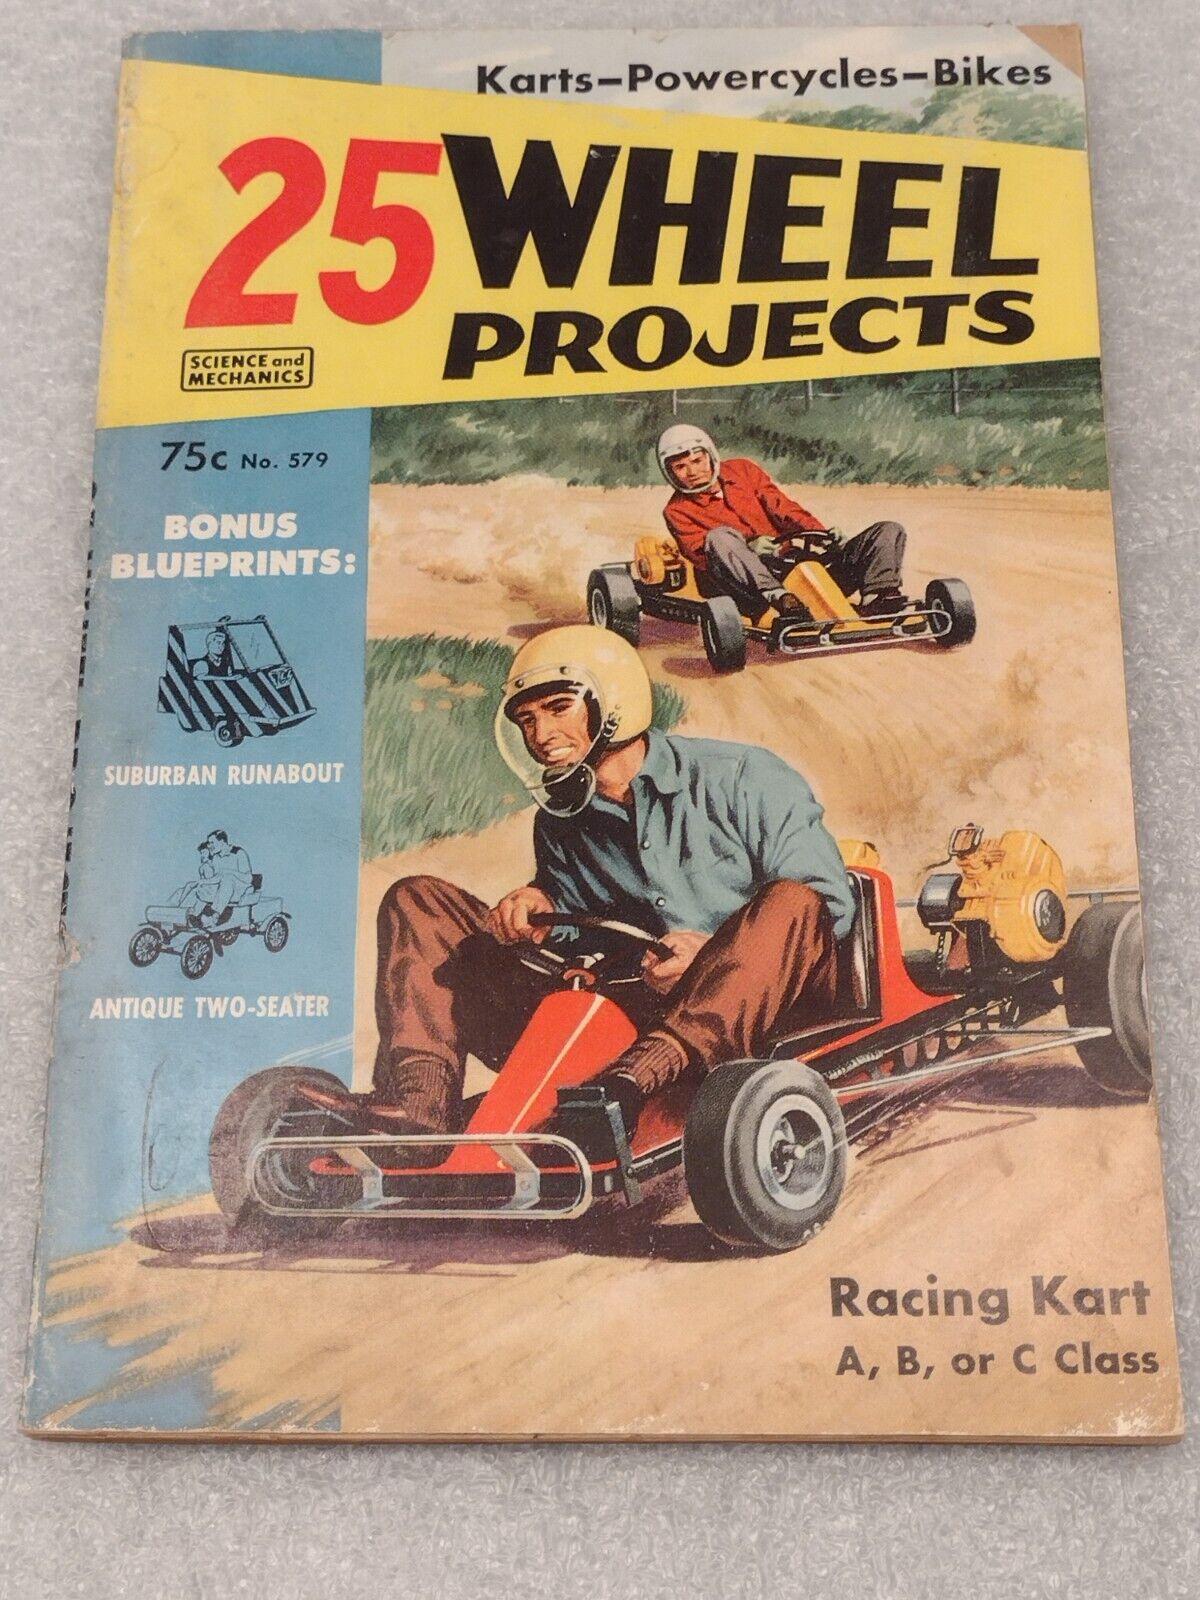 Vintage 25 Wheel Projects Science and Mechanics Magazine 1961 Ison Race Kart